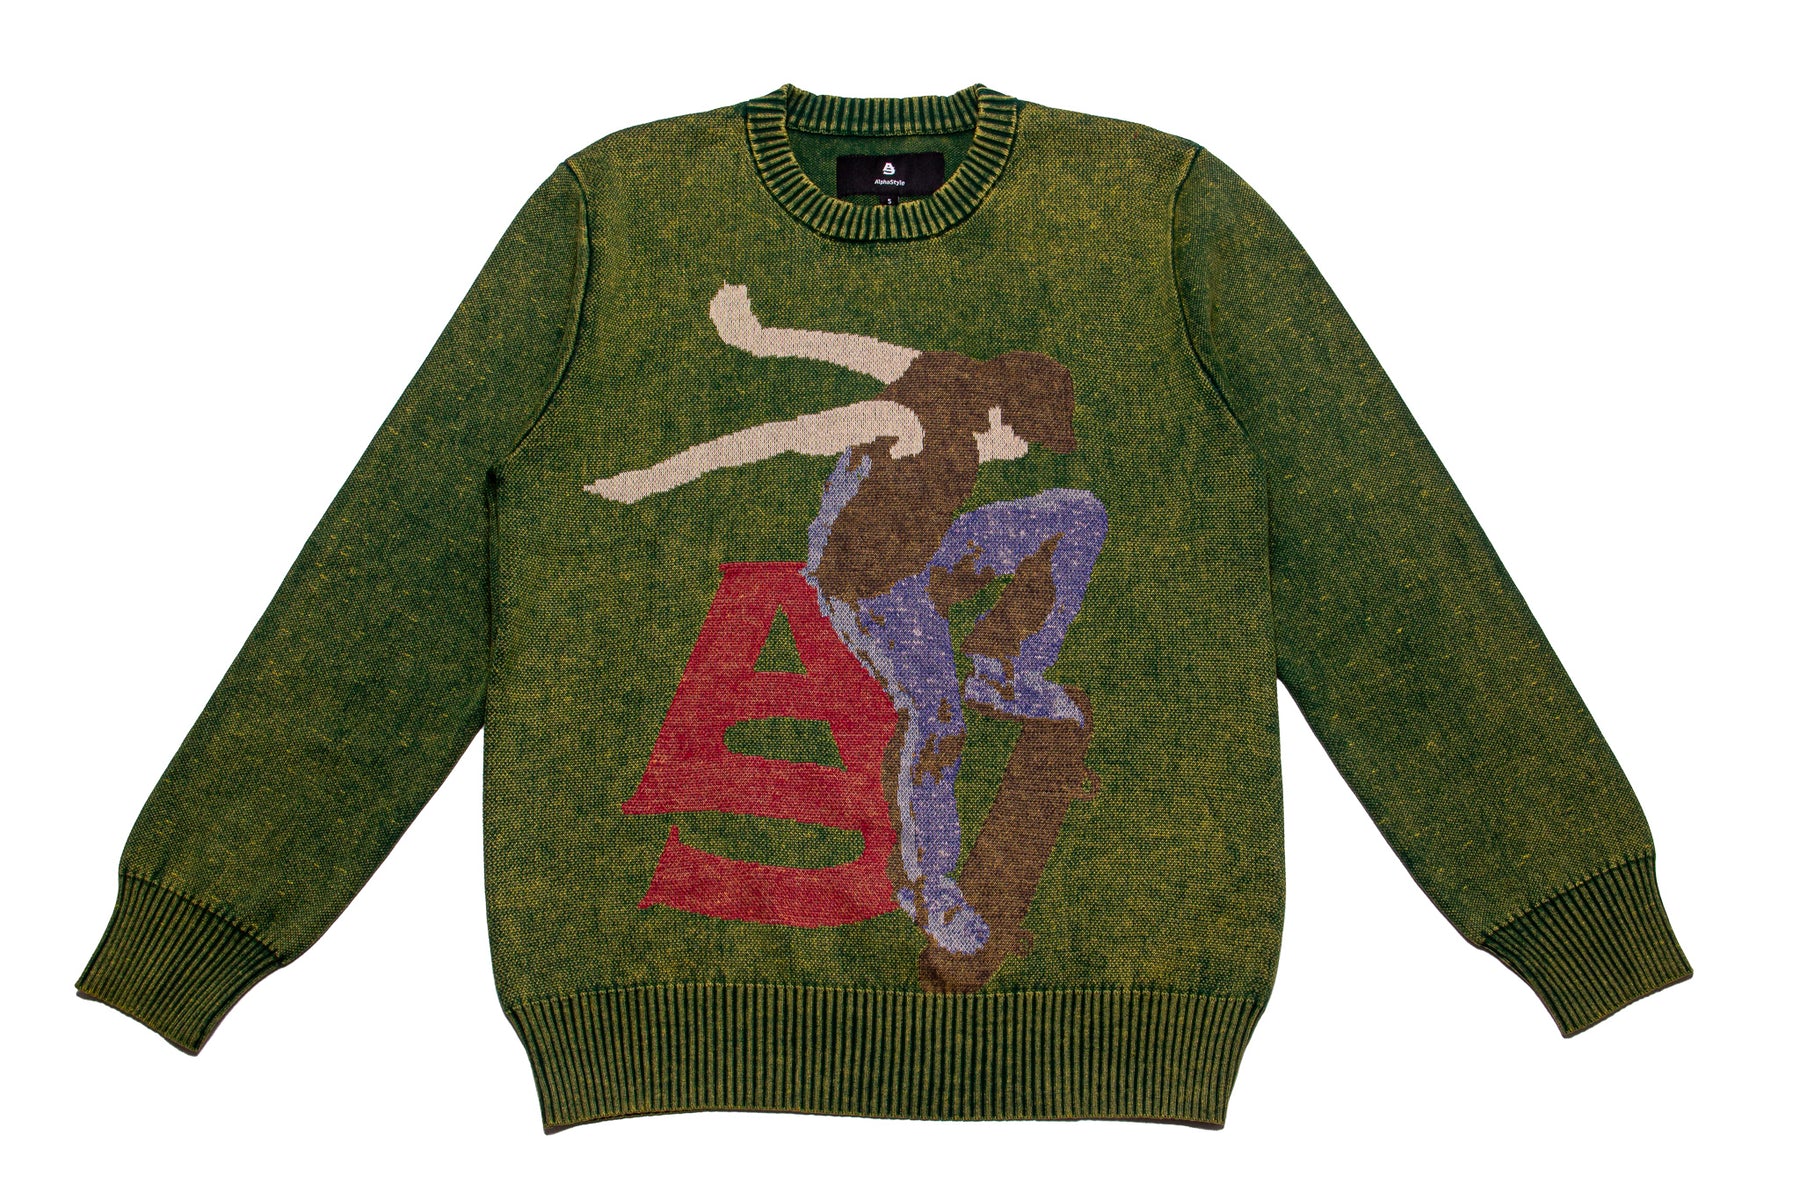 AlphaStyle Elkhead Knitted Sweater "Green"